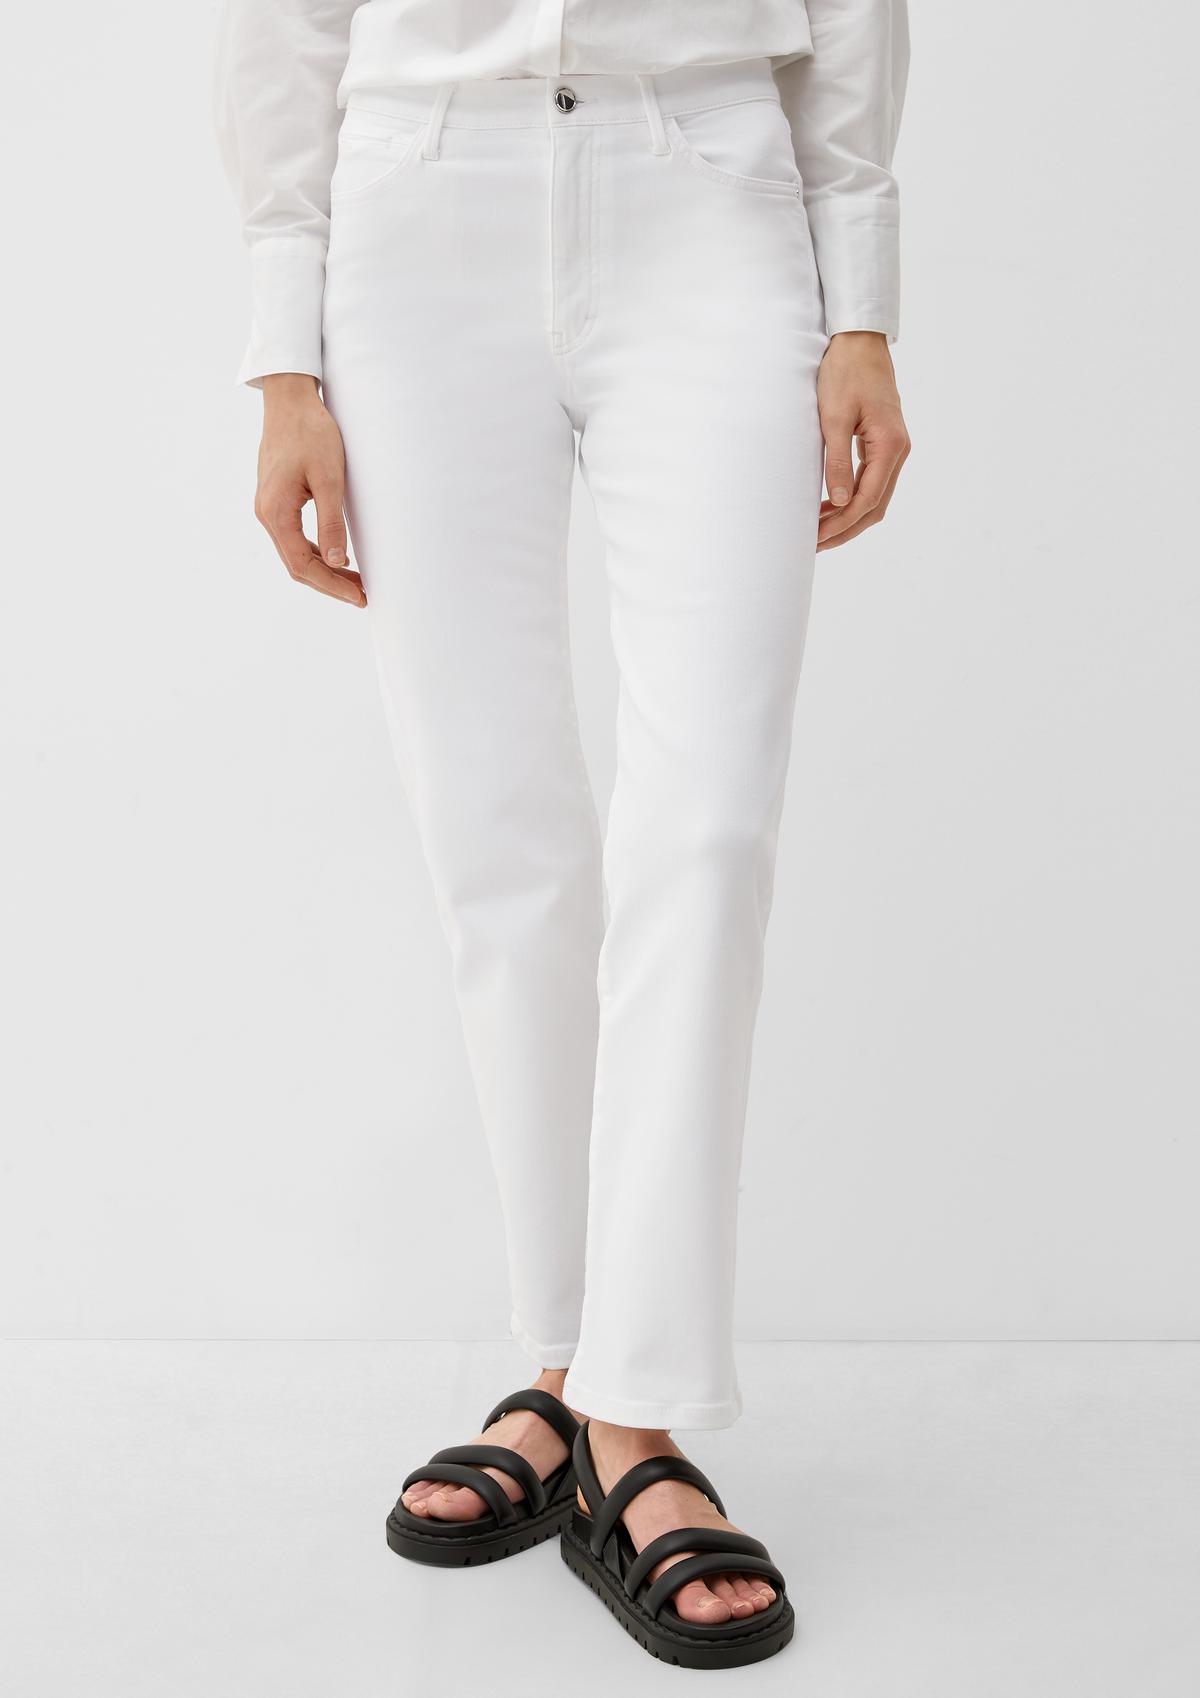 s.Oliver Regular fit: cropped jeans with a straight leg